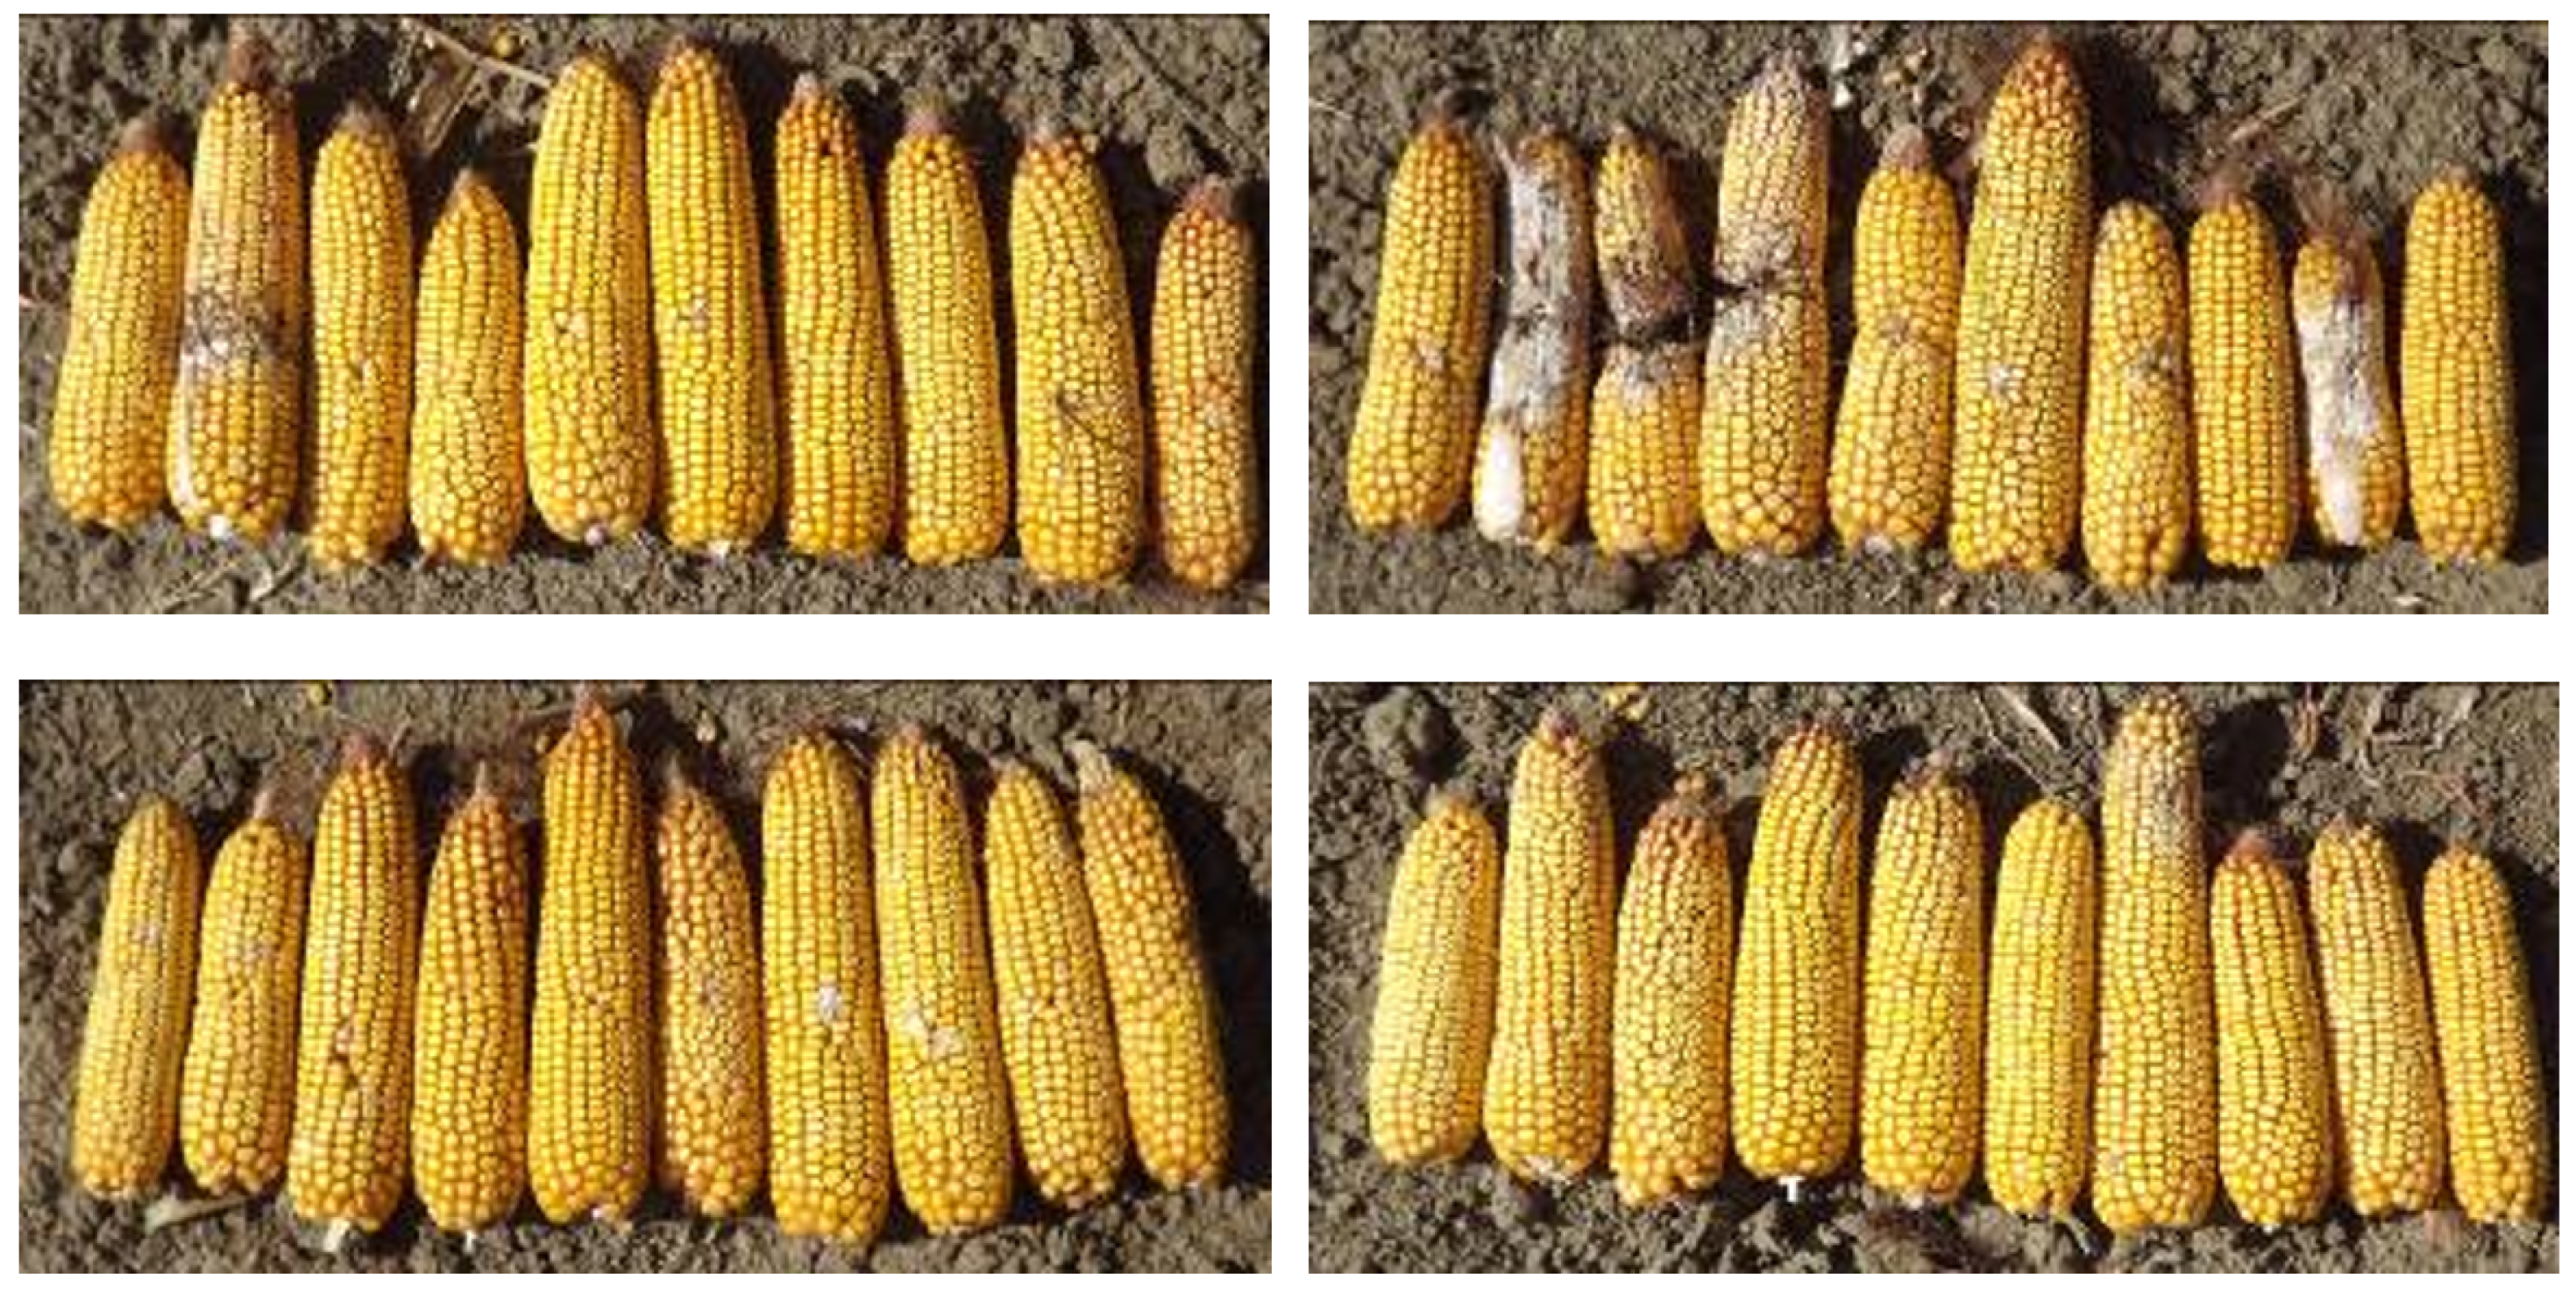 Agronomy | Free Full-Text | Resistance of Maize Hybrids to Fusarium  graminearum, F. culmorum, and F. verticillioides Ear Rots with Toothpick  and Silk Channel Inoculation, as Well as Their Toxin Production | HTML